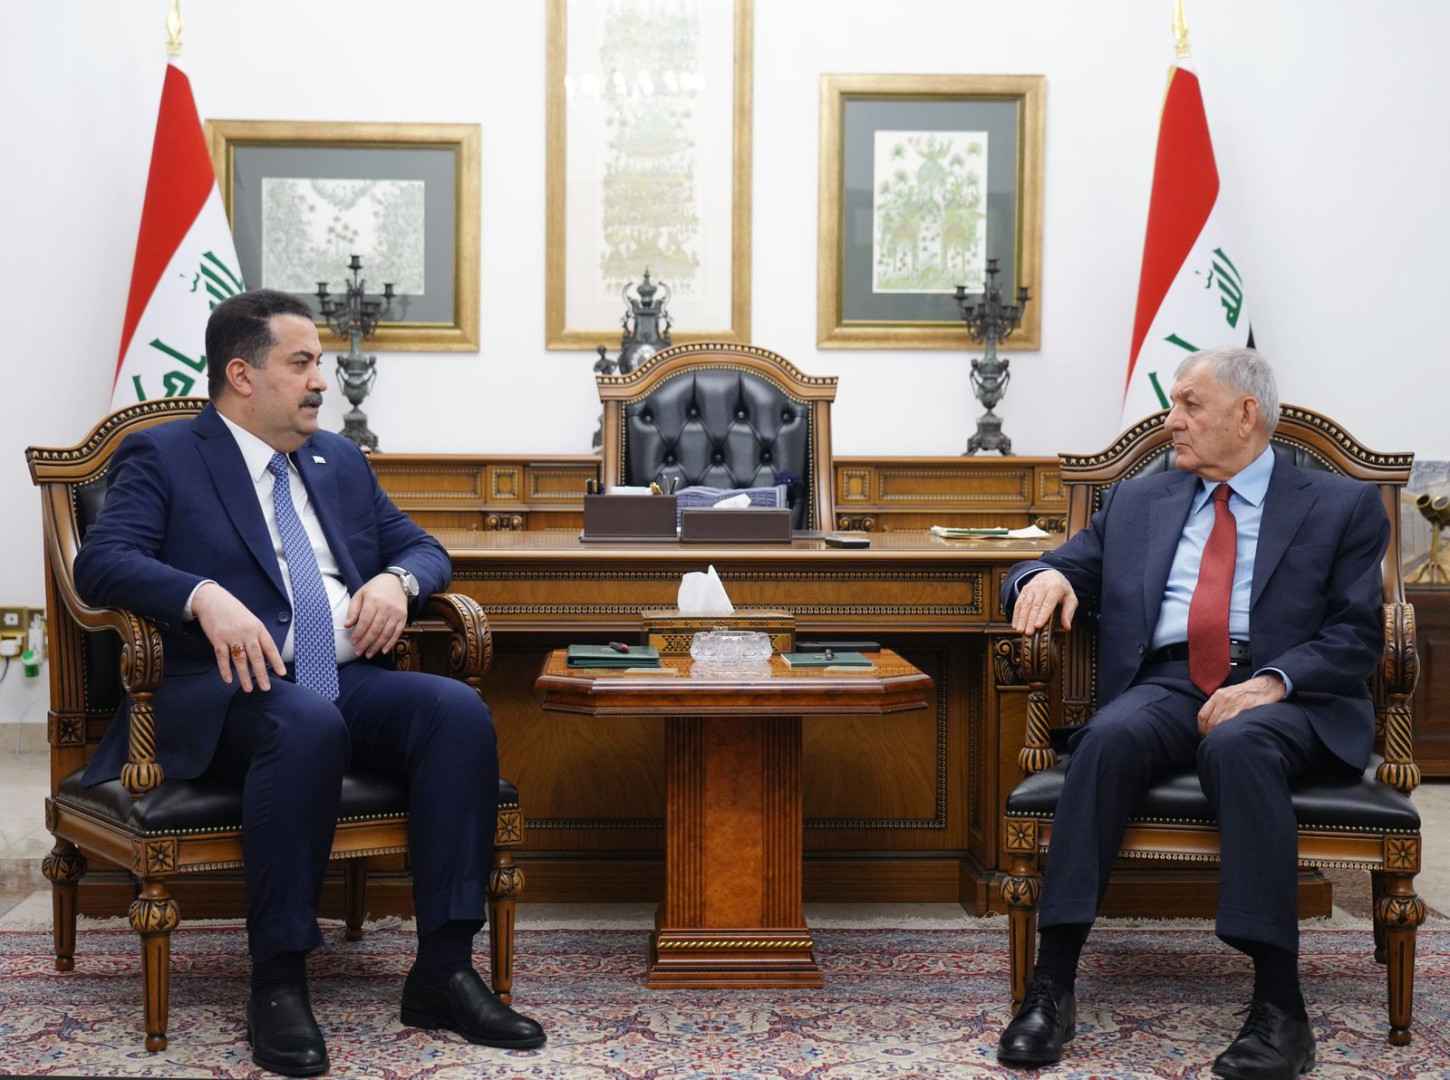 Iraqi Prime Minister and President discuss national and international developments